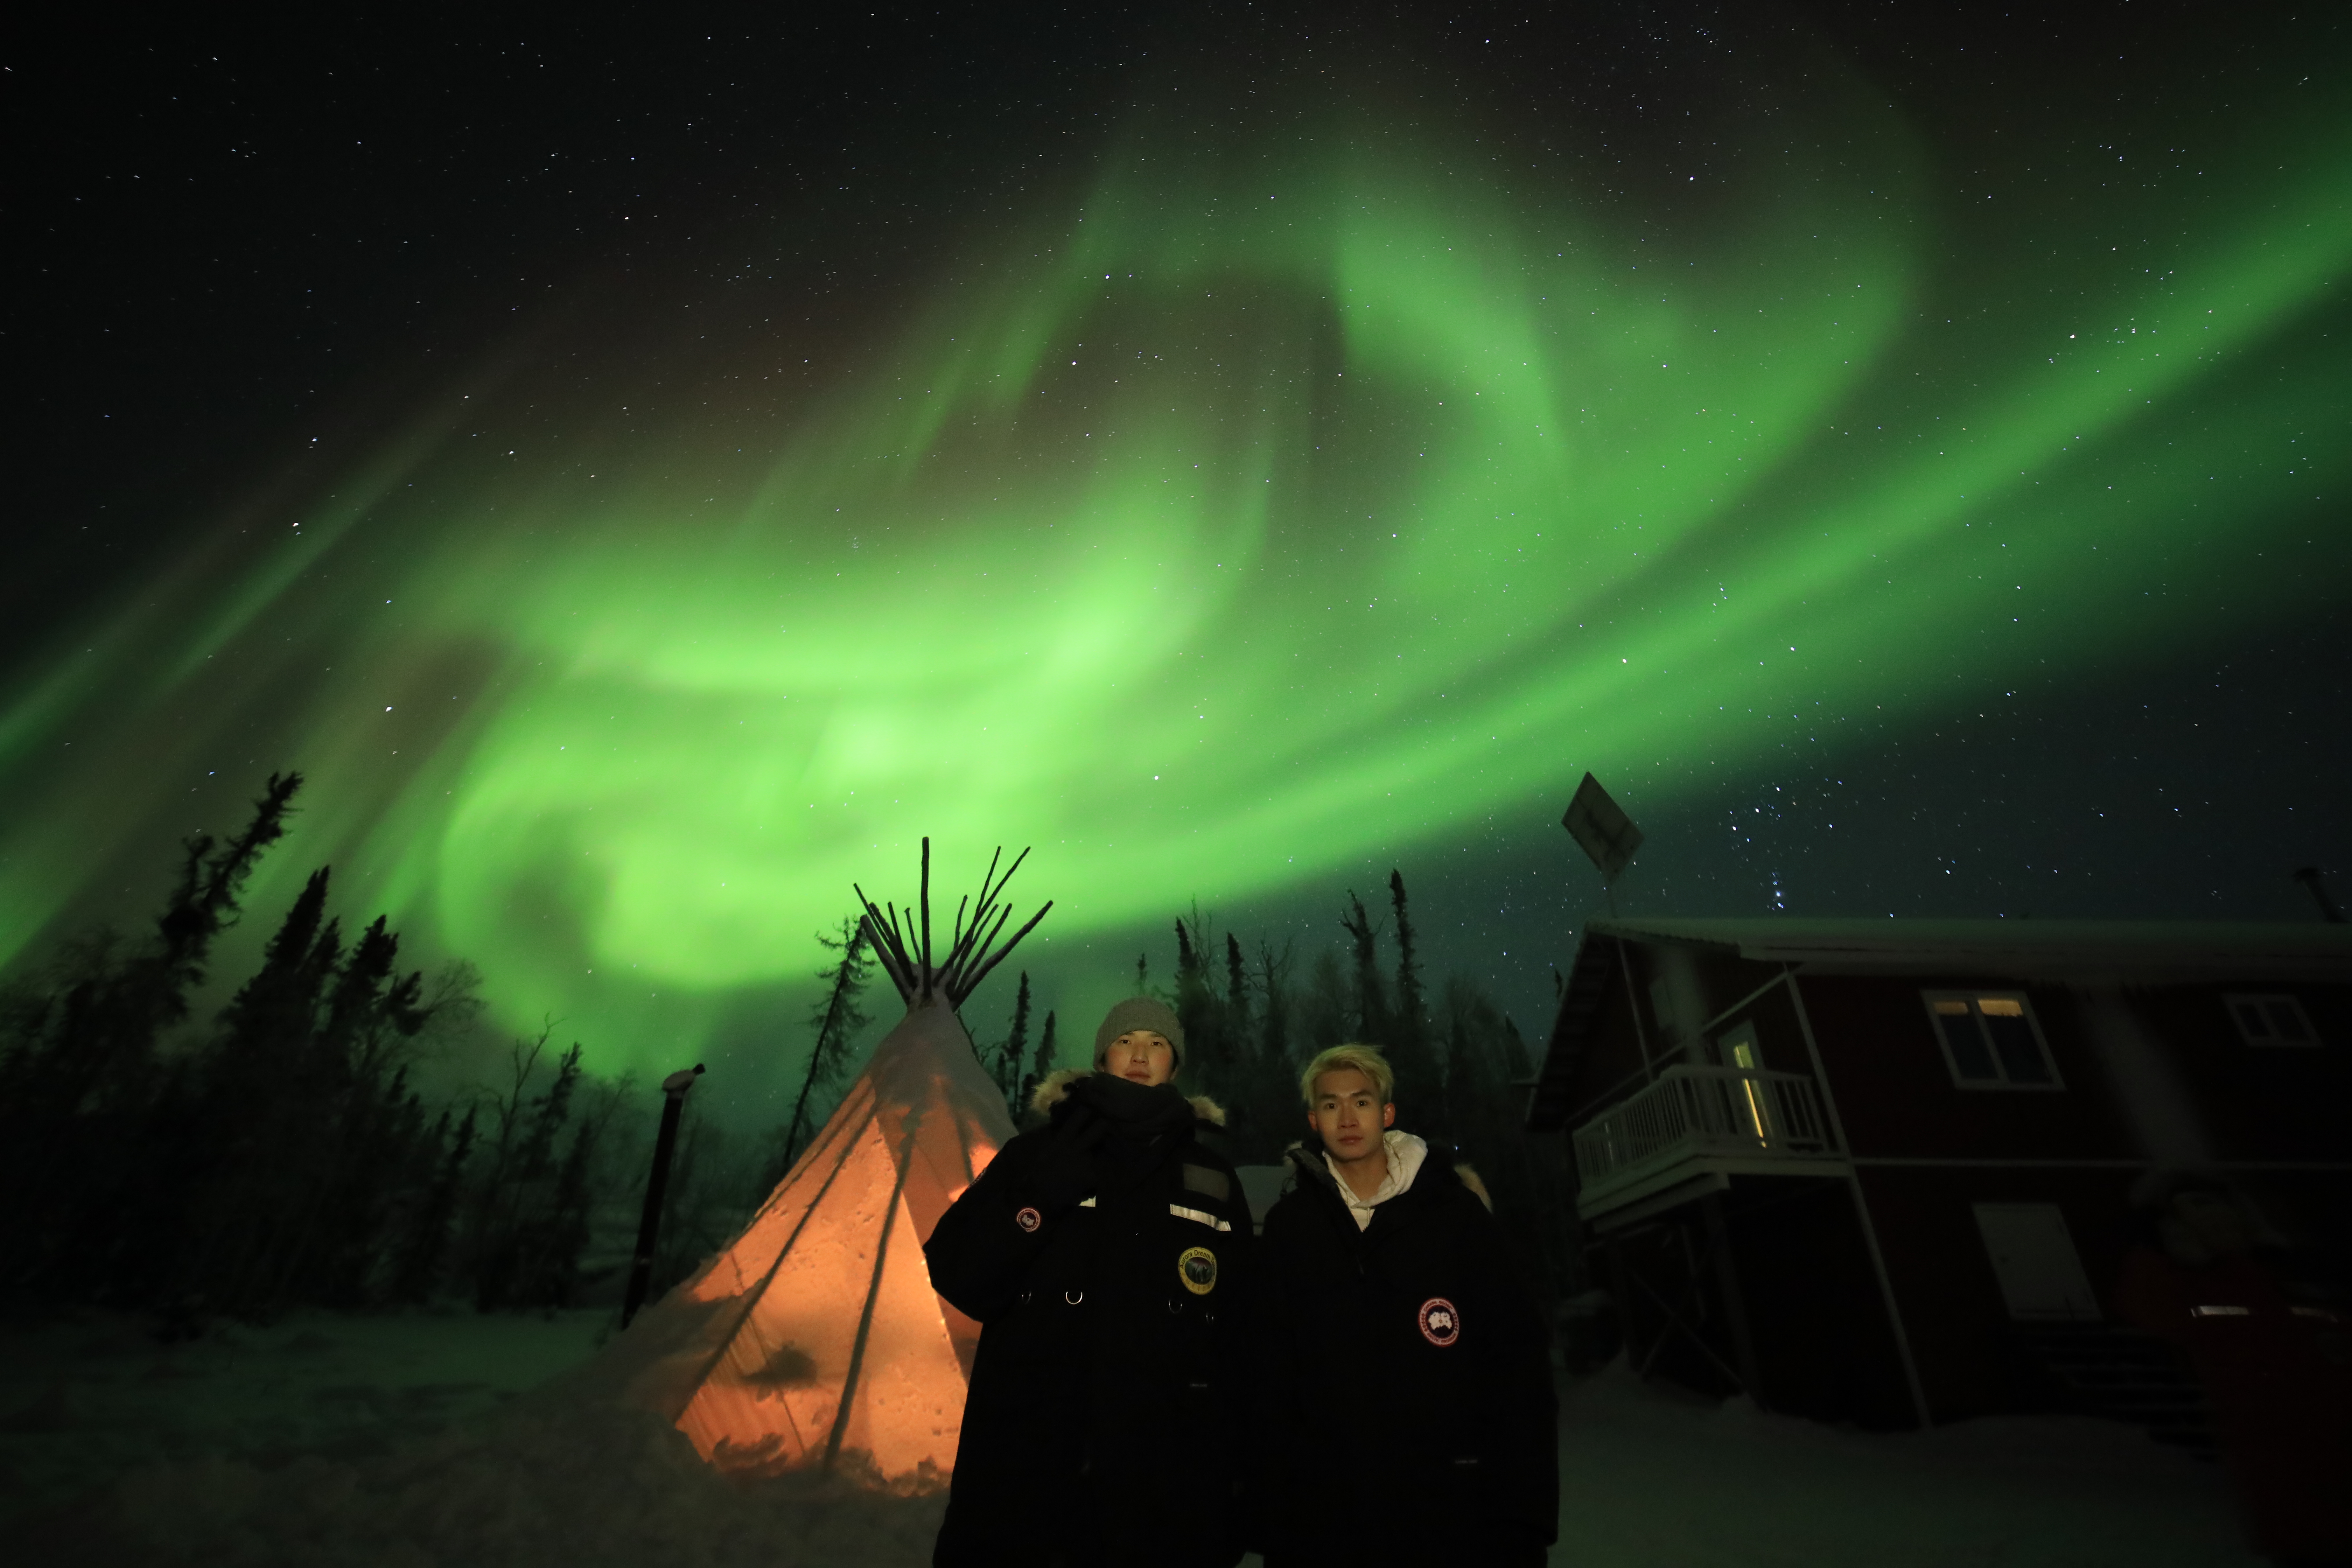 Miklos and I took a photo under the aurora